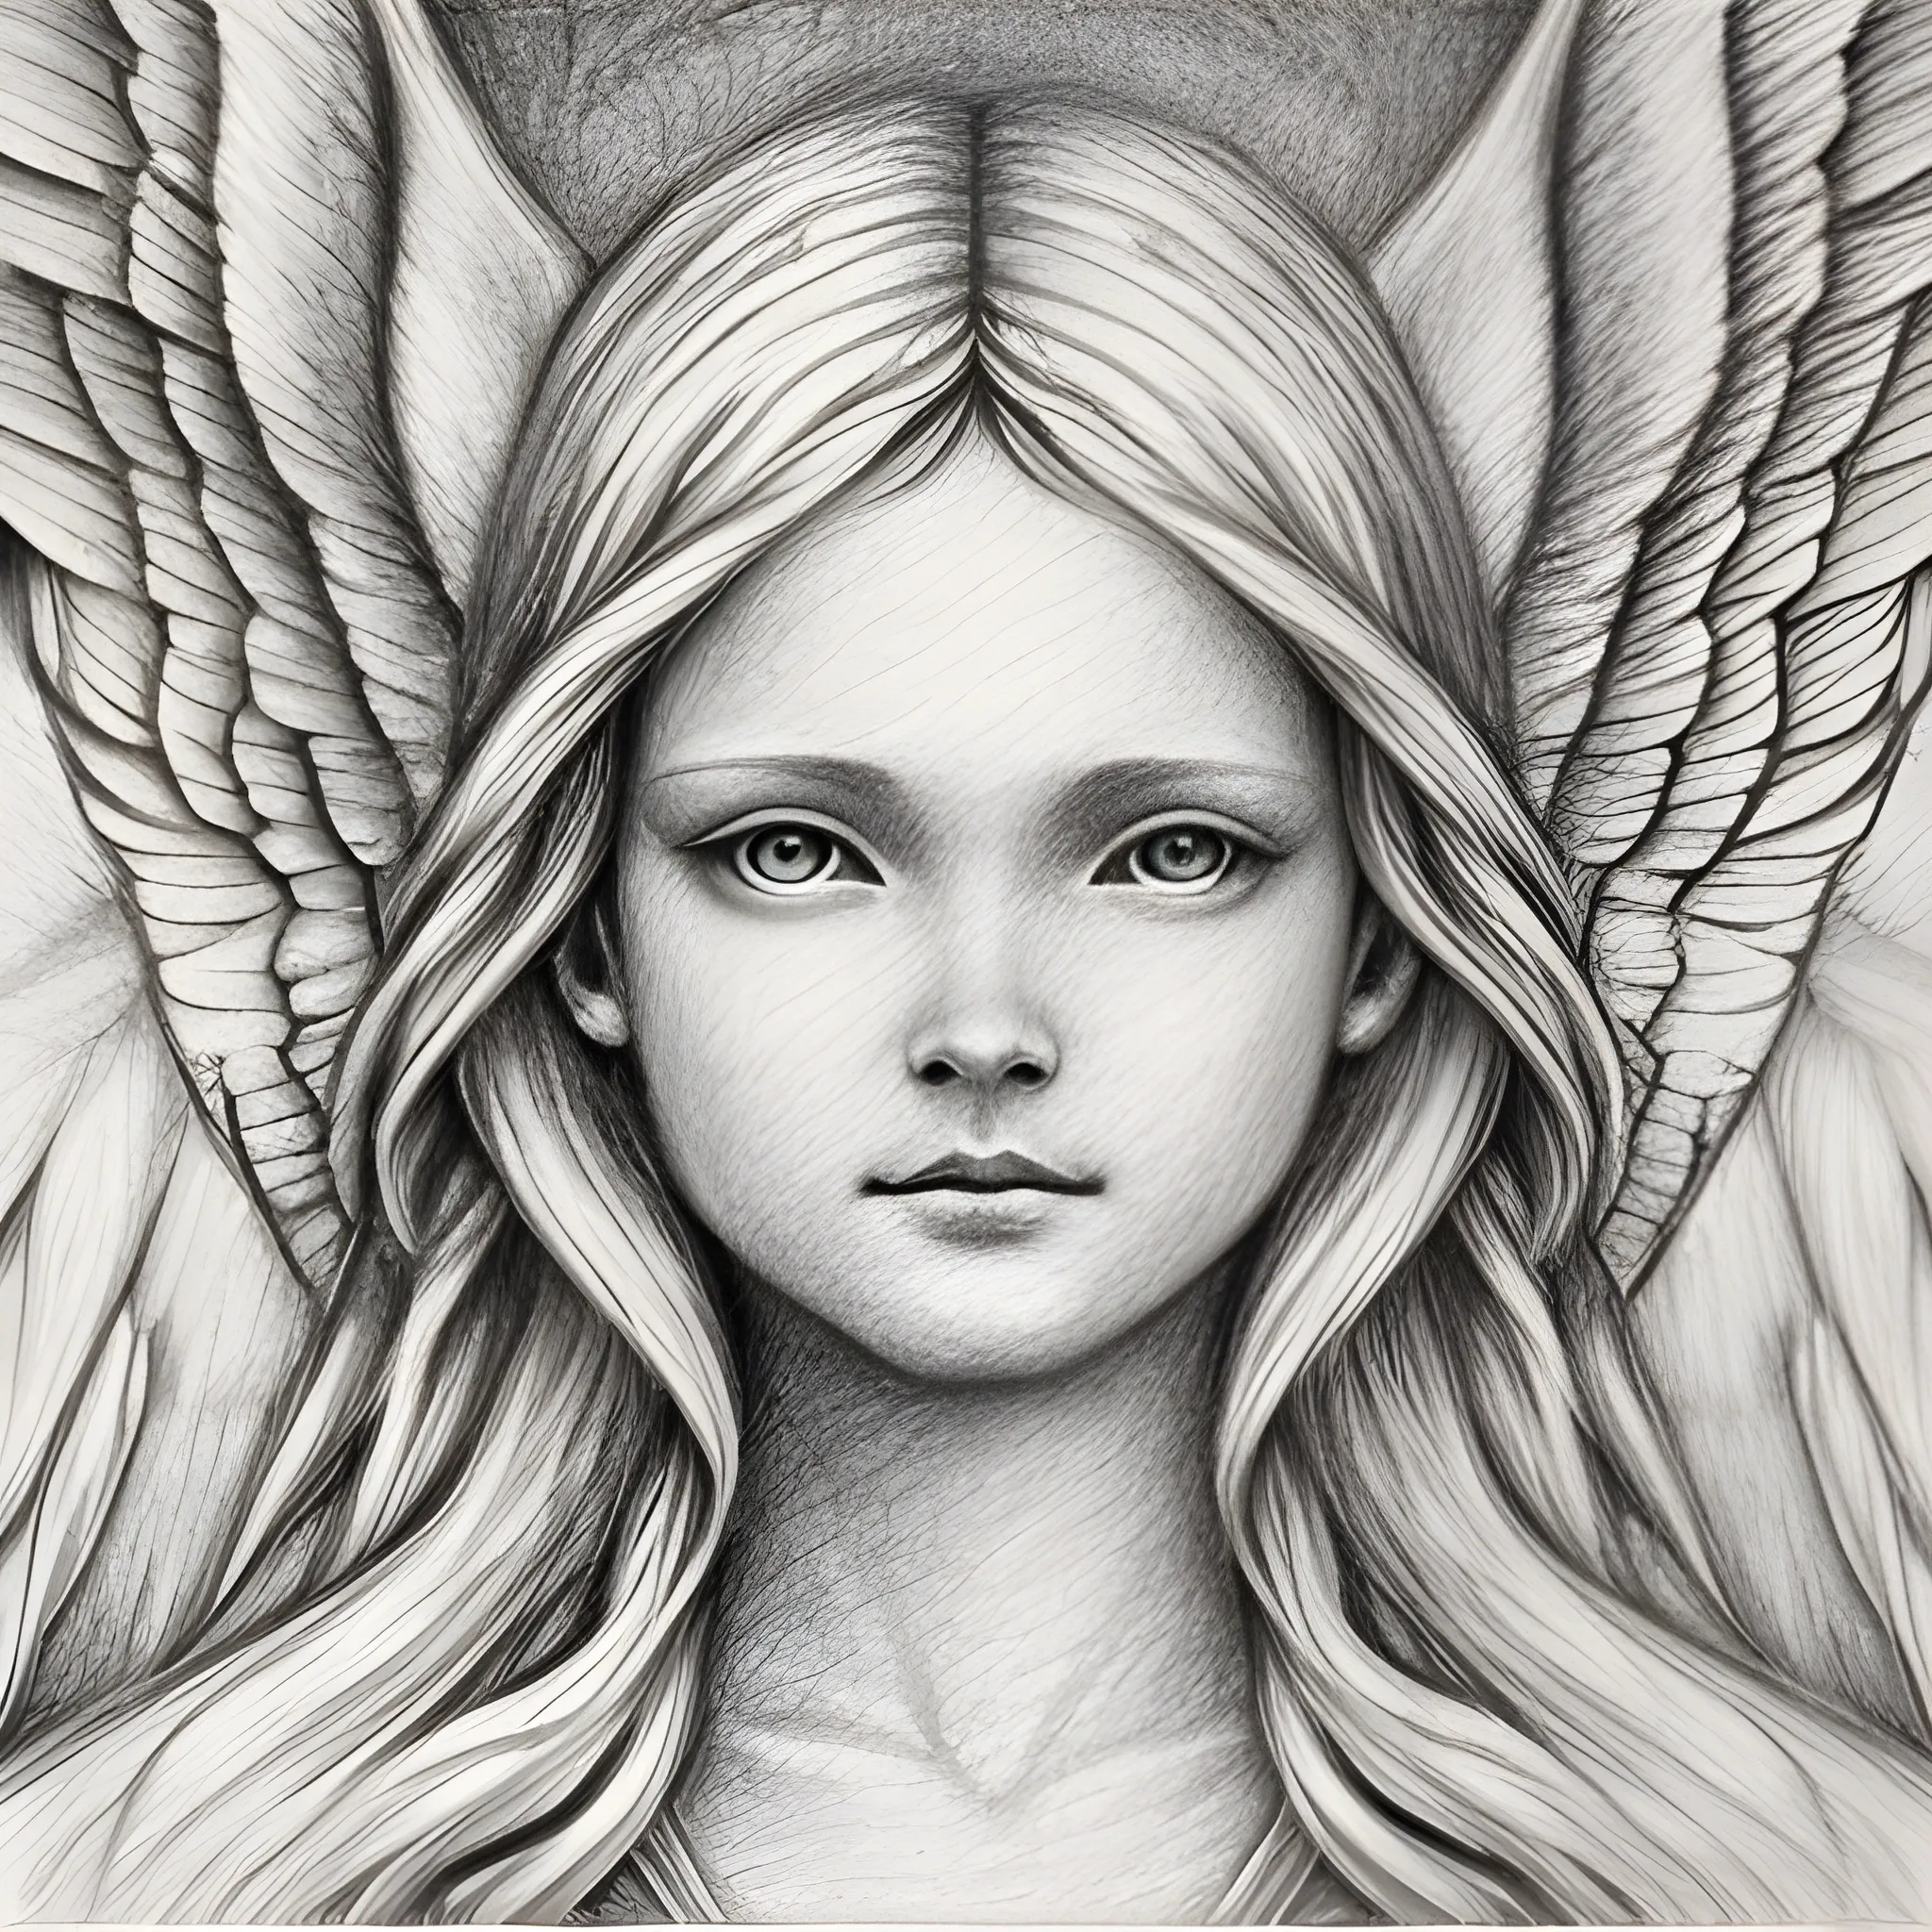 An angel among the clouds. My little pencil drawing. — Steemit